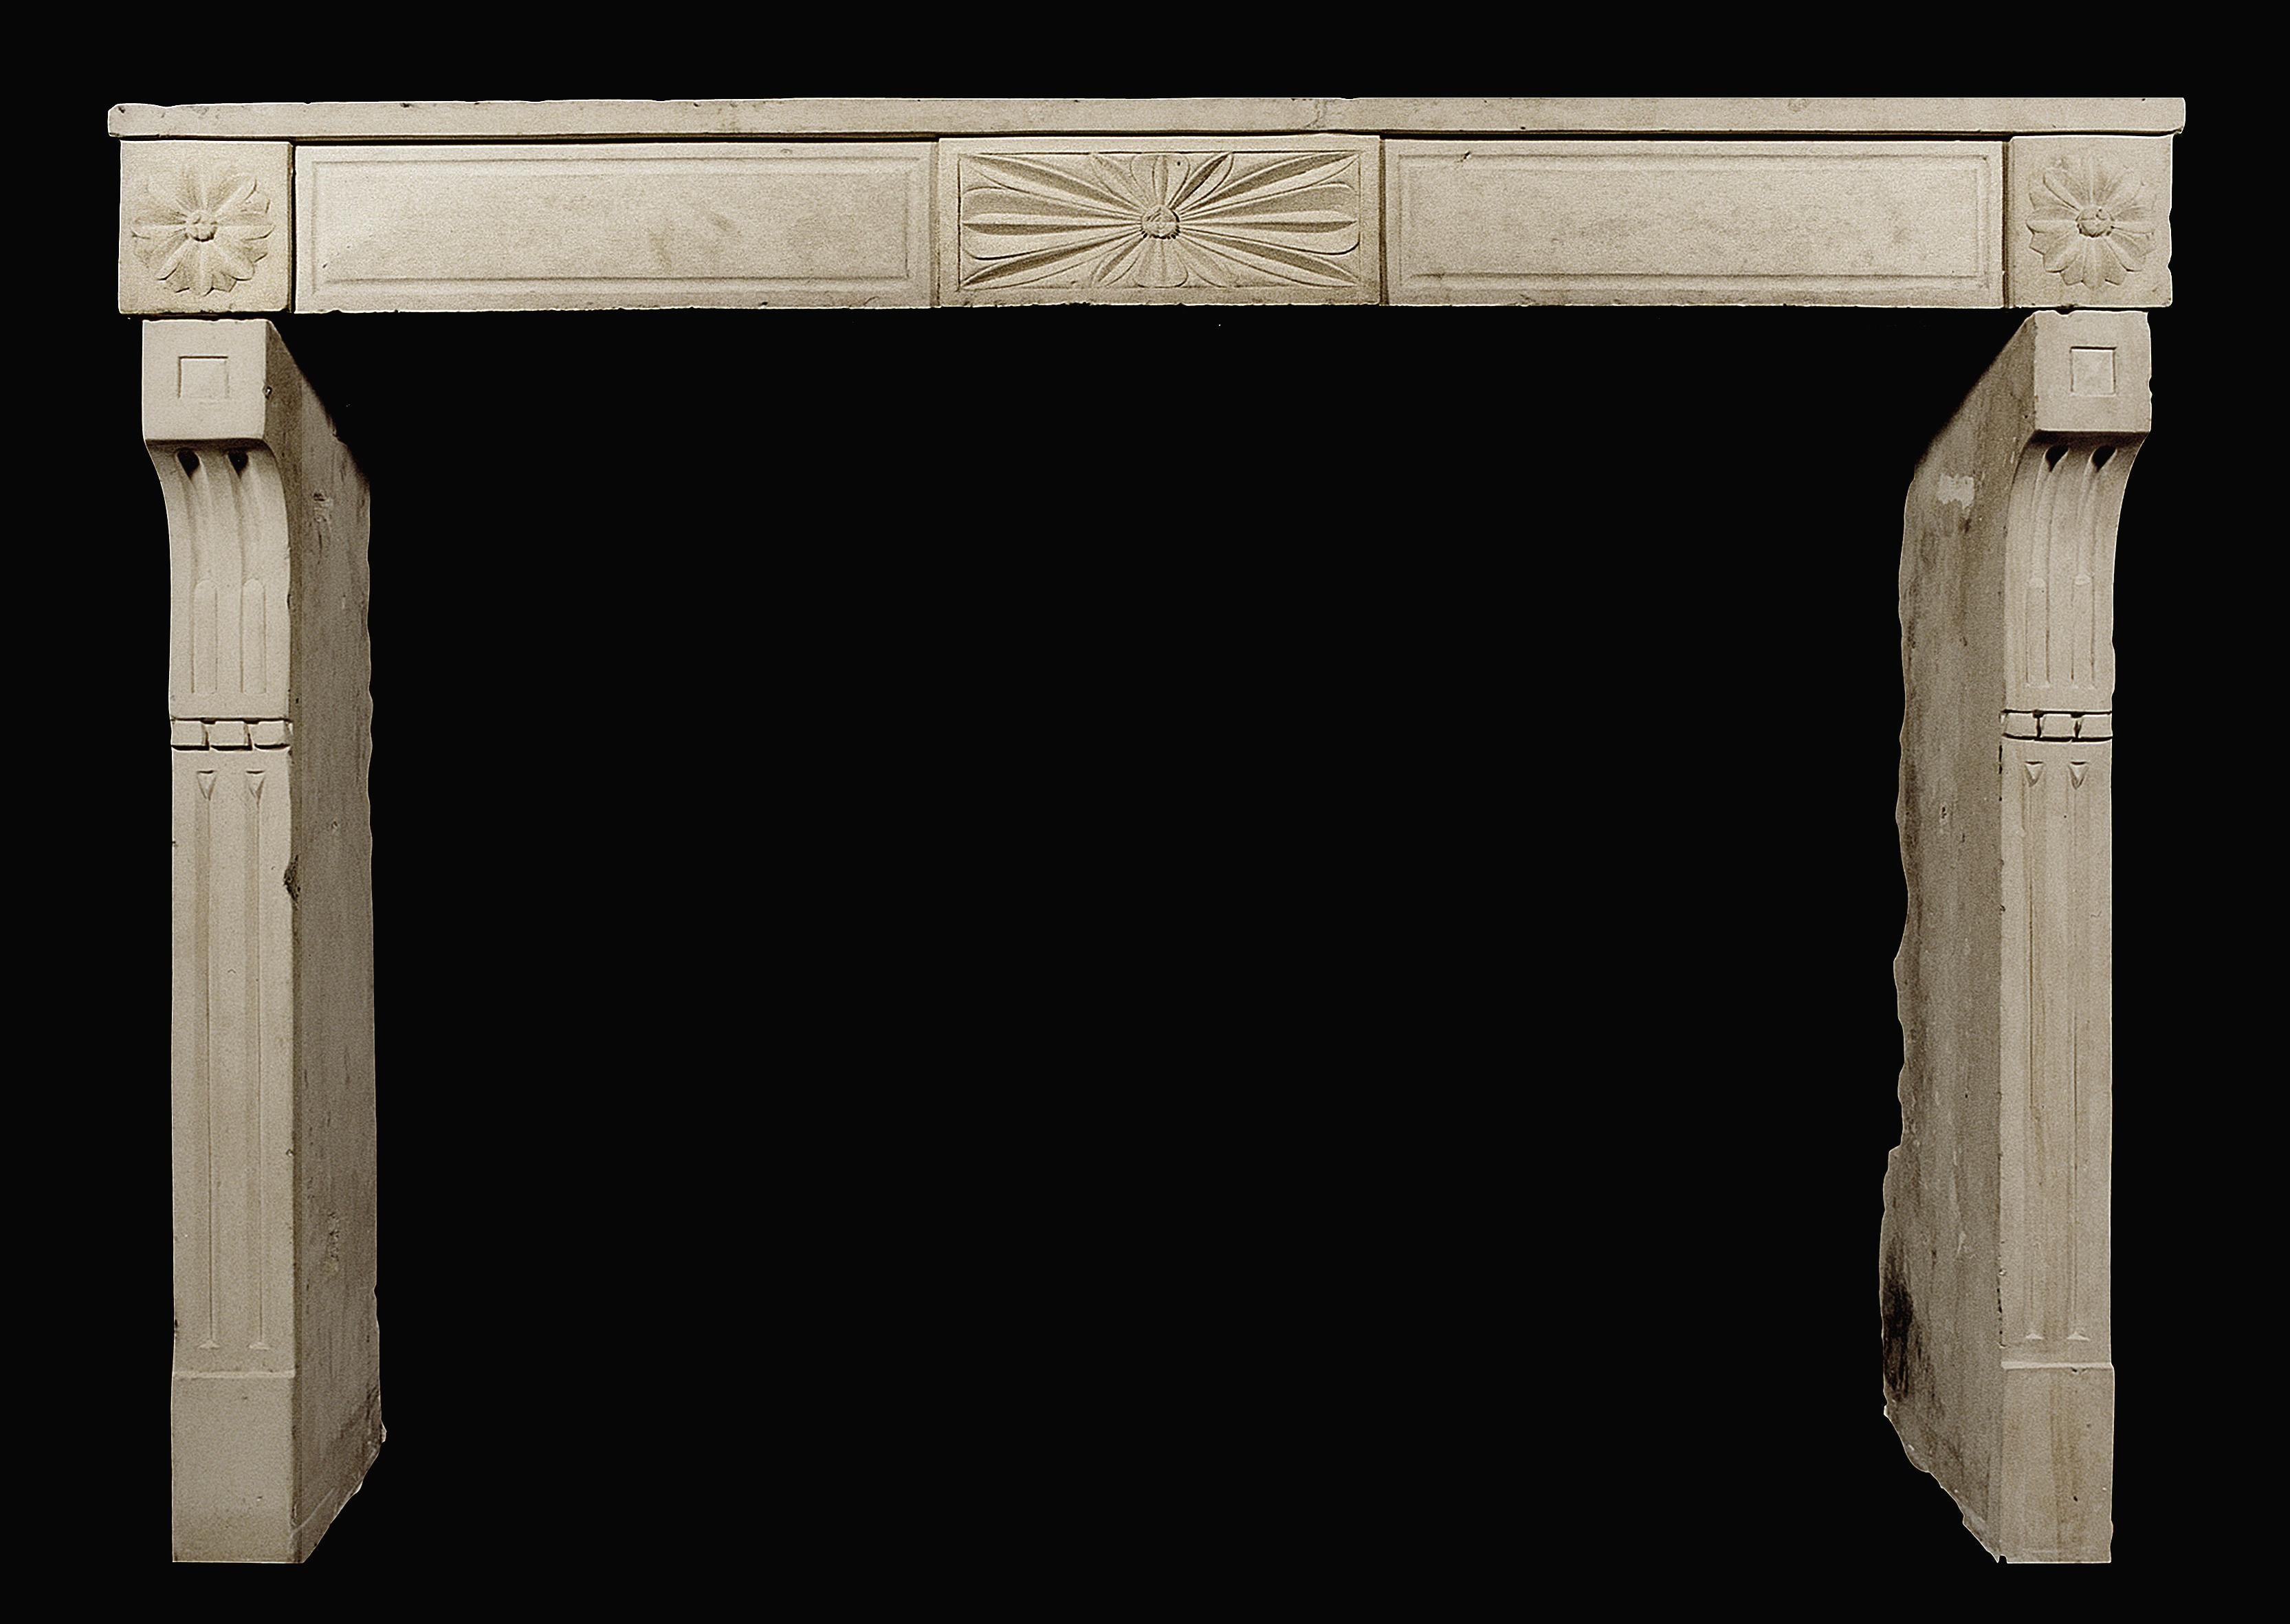 An 18th century French Louis XVI stone fireplace with sunburst centre blocking, and shaped fluted jambs.

Measures: 
Shelf Width:	1550 mm      	61 in
Overall Height:	1130 mm      	44 1/2 in
Opening Height:	970 mm      	38 1/4 in
Opening Width:	1310